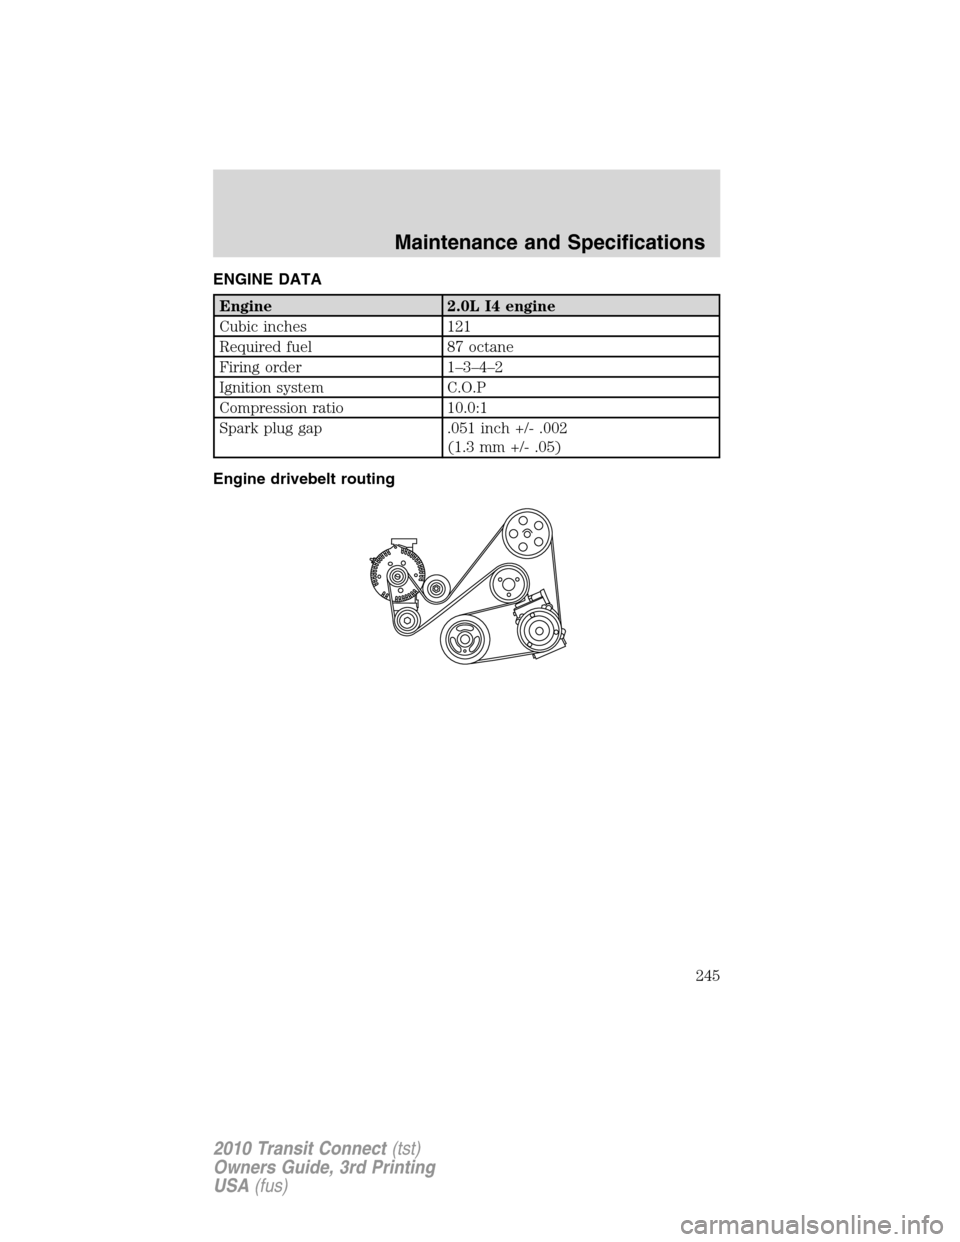 FORD TRANSIT CONNECT 2010 1.G Manual PDF ENGINE DATA
Engine 2.0L I4 engine
Cubic inches 121
Required fuel 87 octane
Firing order 1–3–4–2
Ignition system C.O.P
Compression ratio 10.0:1
Spark plug gap .051 inch +/- .002
(1.3 mm +/- .05)
